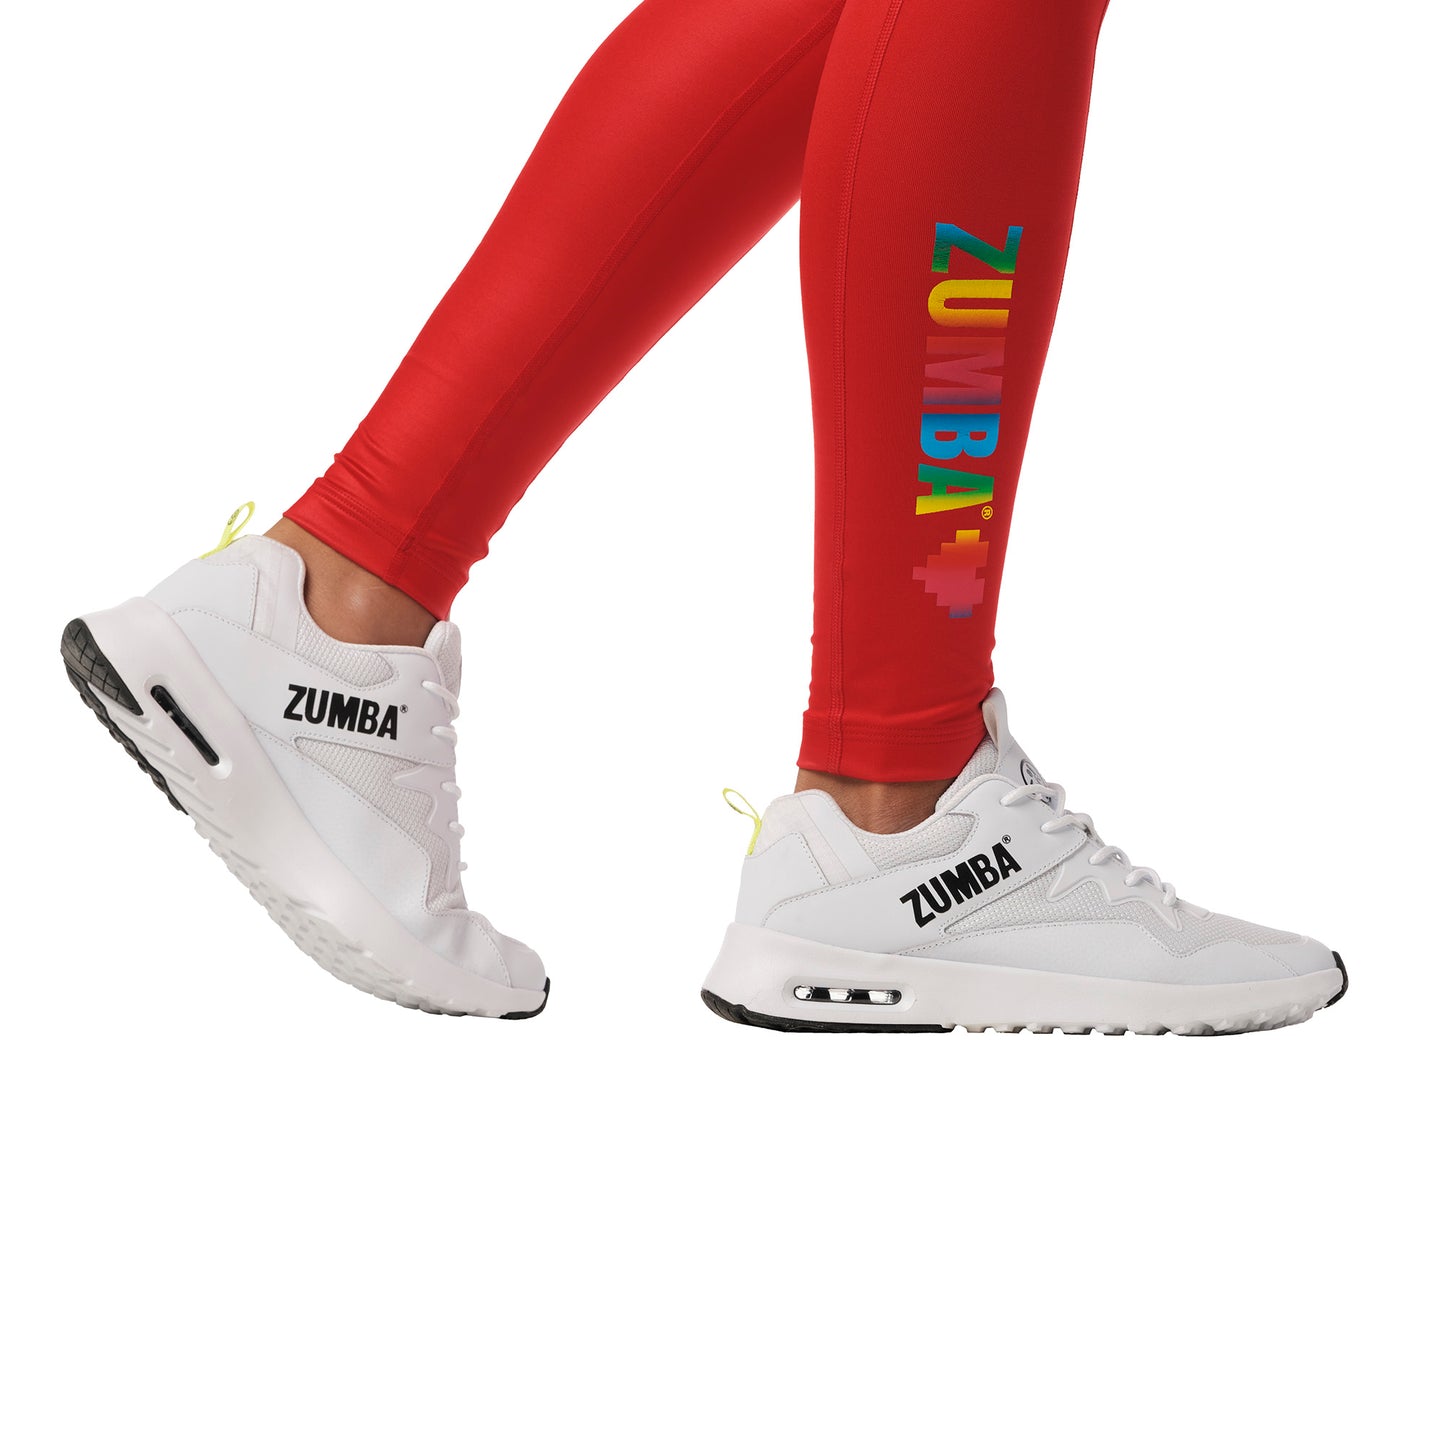 Bright And Bold High Waisted Ankle Leggings